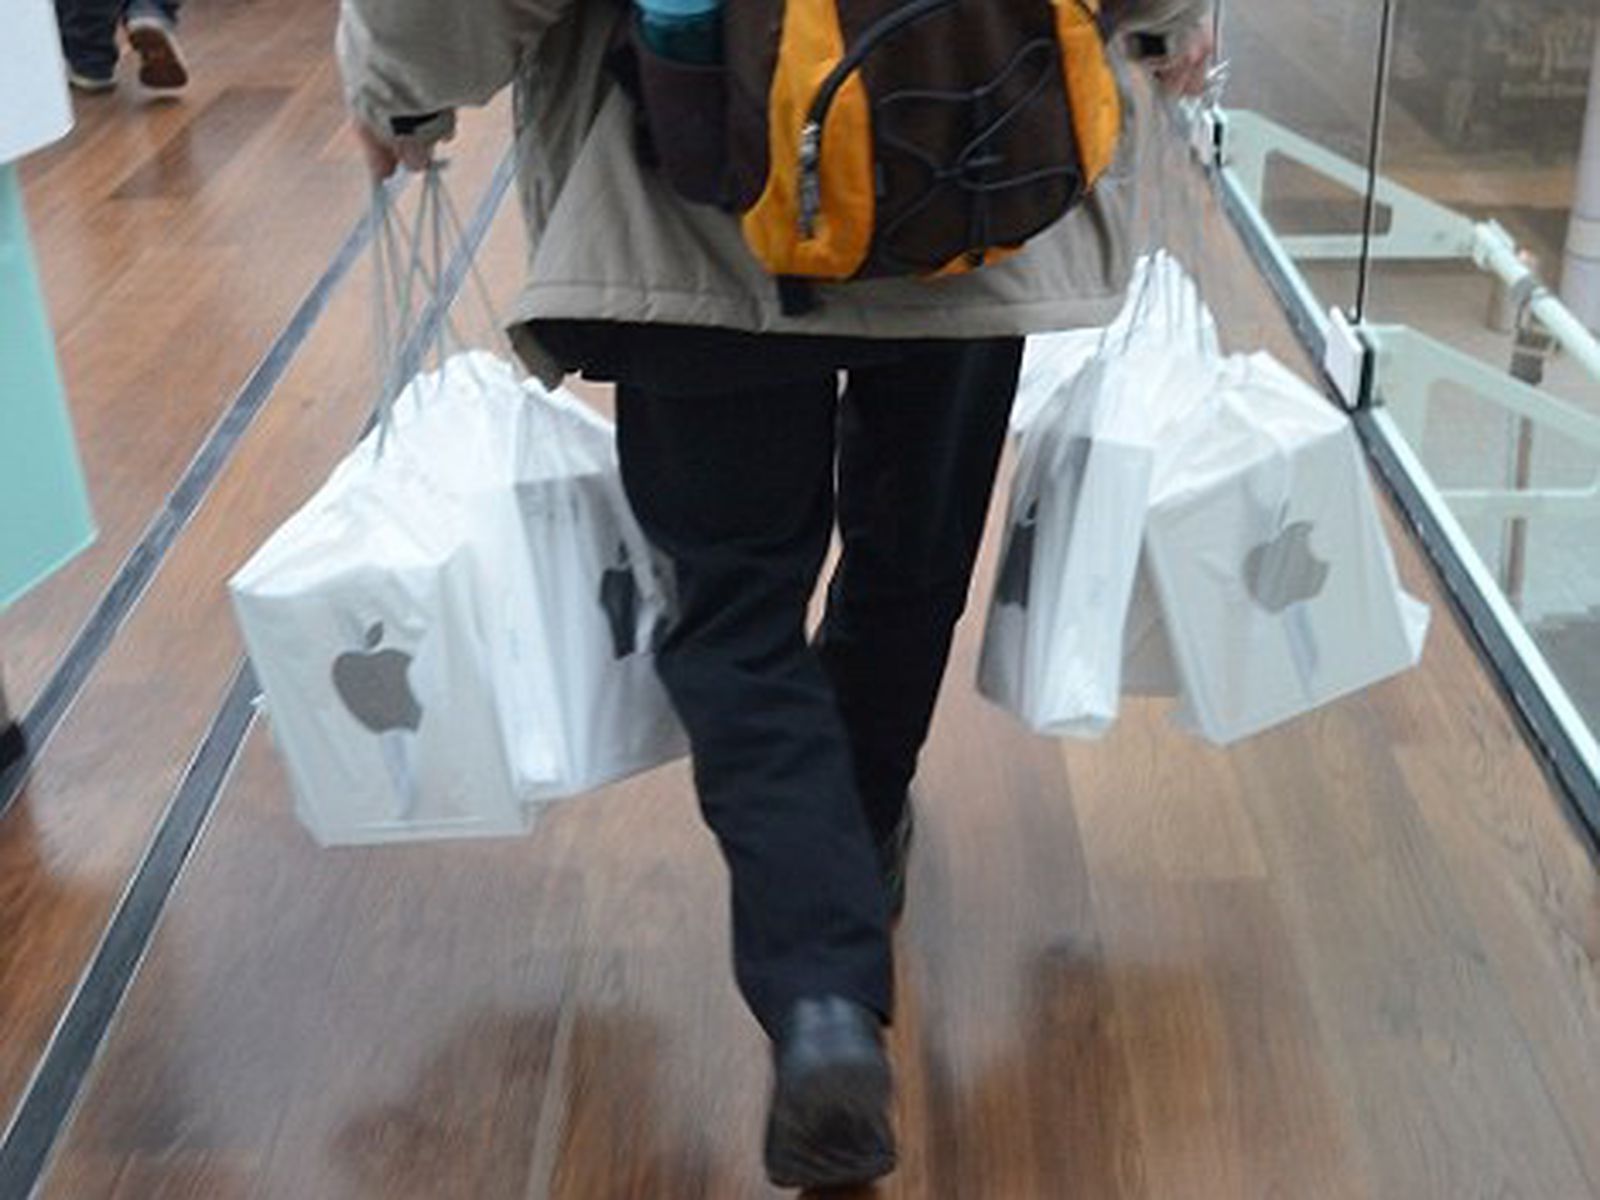 Apple Stores to use paper, not plastic, bags in environmental push